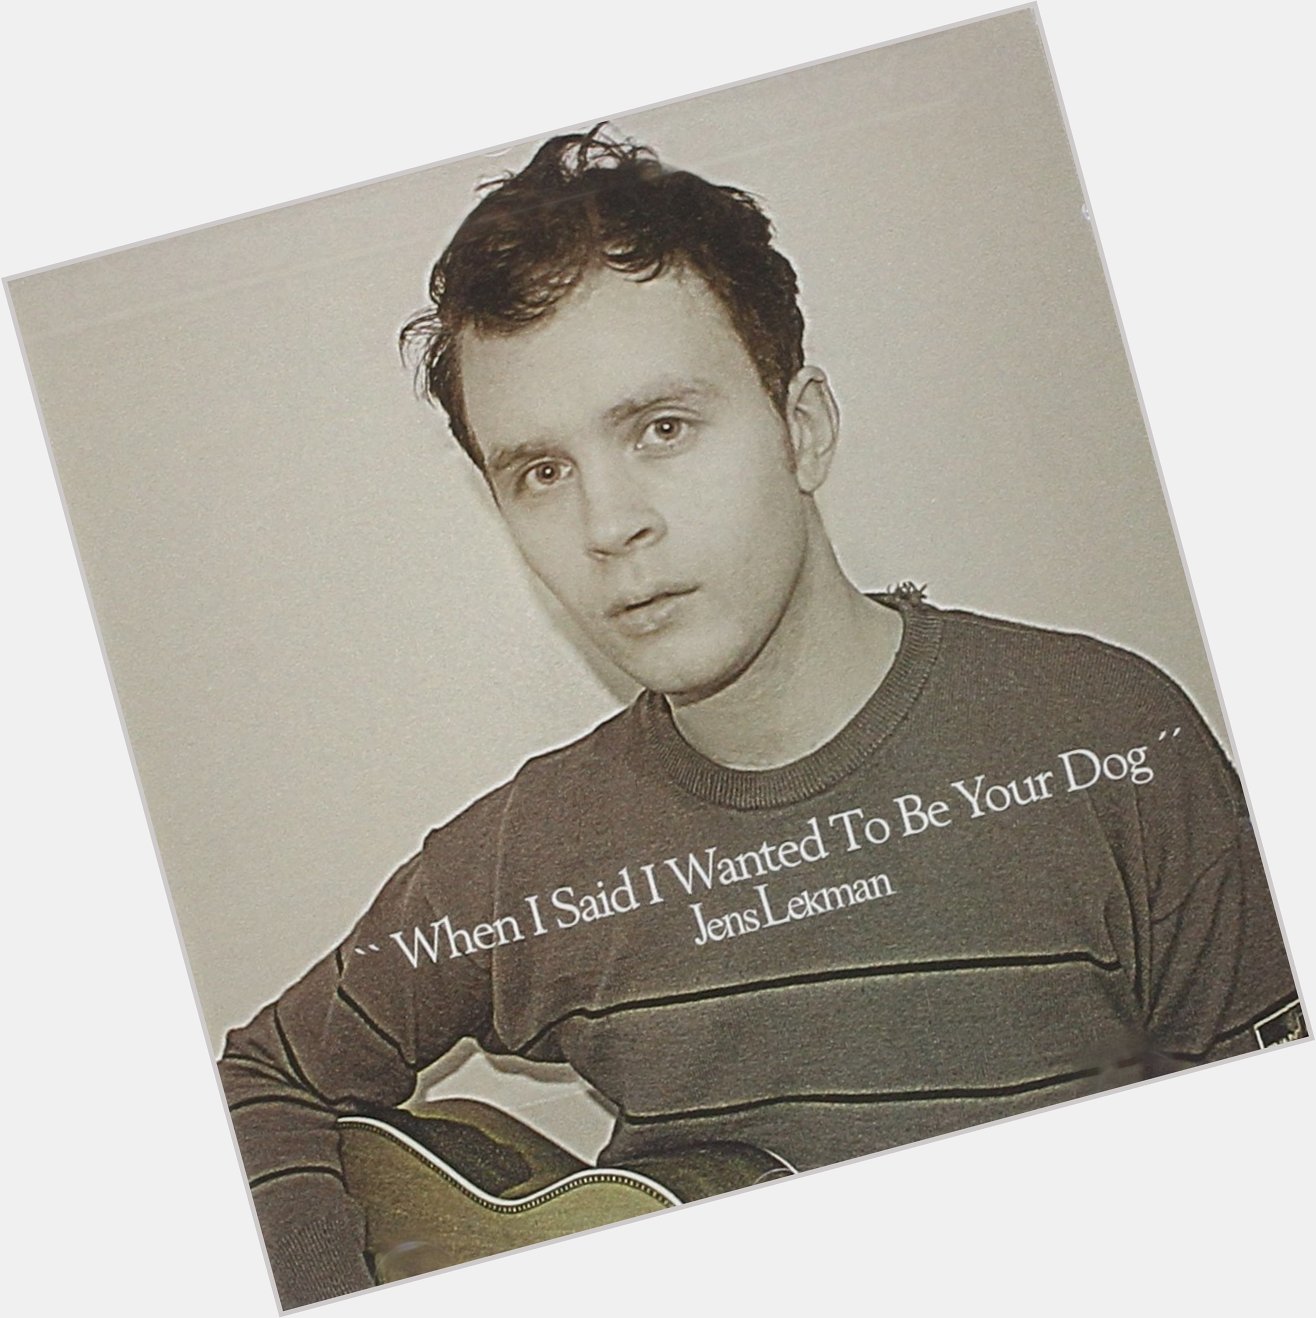 Happy birthday, dear friend Jens Lekman. Get \When I Said I Wanted to be Your Dog\ on vinyl:  